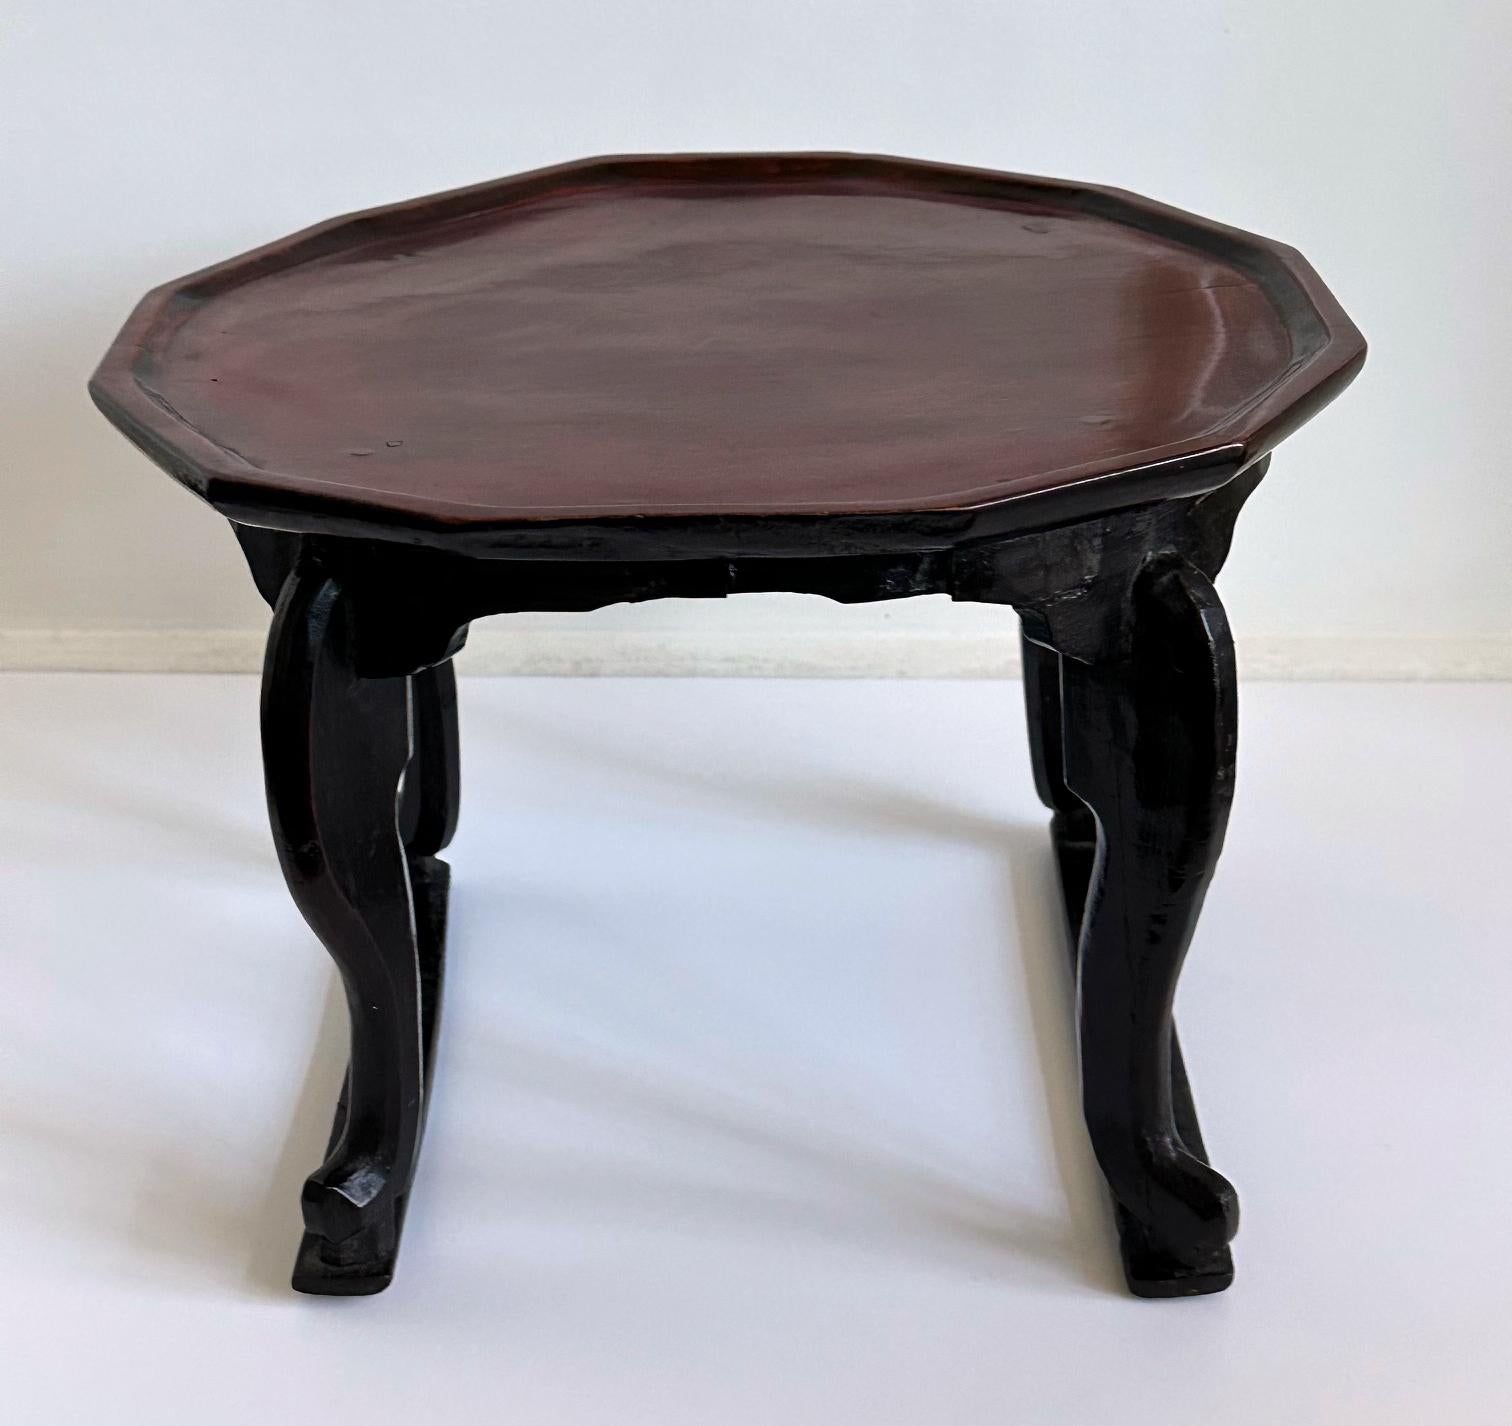 Antique Korean Lacquer Wood Soban Table Joseon Period For Sale 1